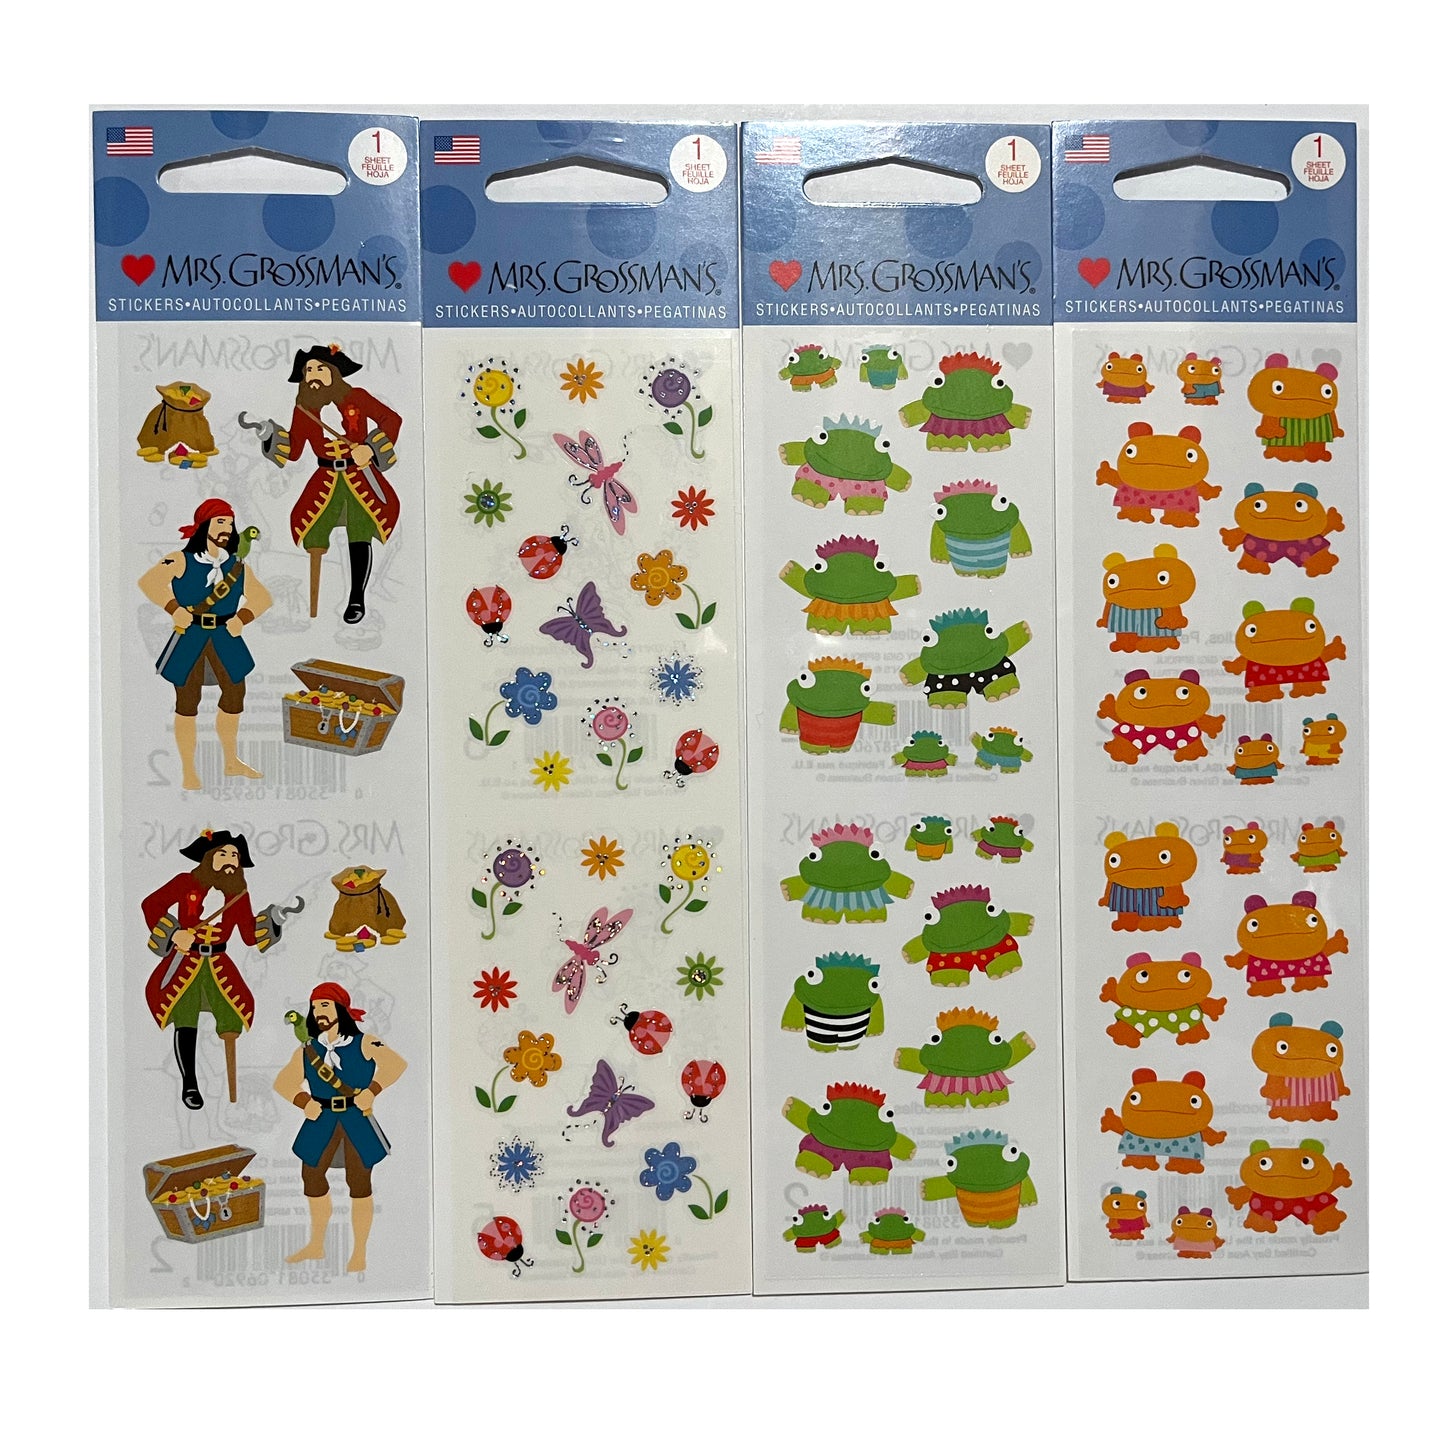 Mrs. Grossman's Pirate and Monsters Sticker Strips - New in Package